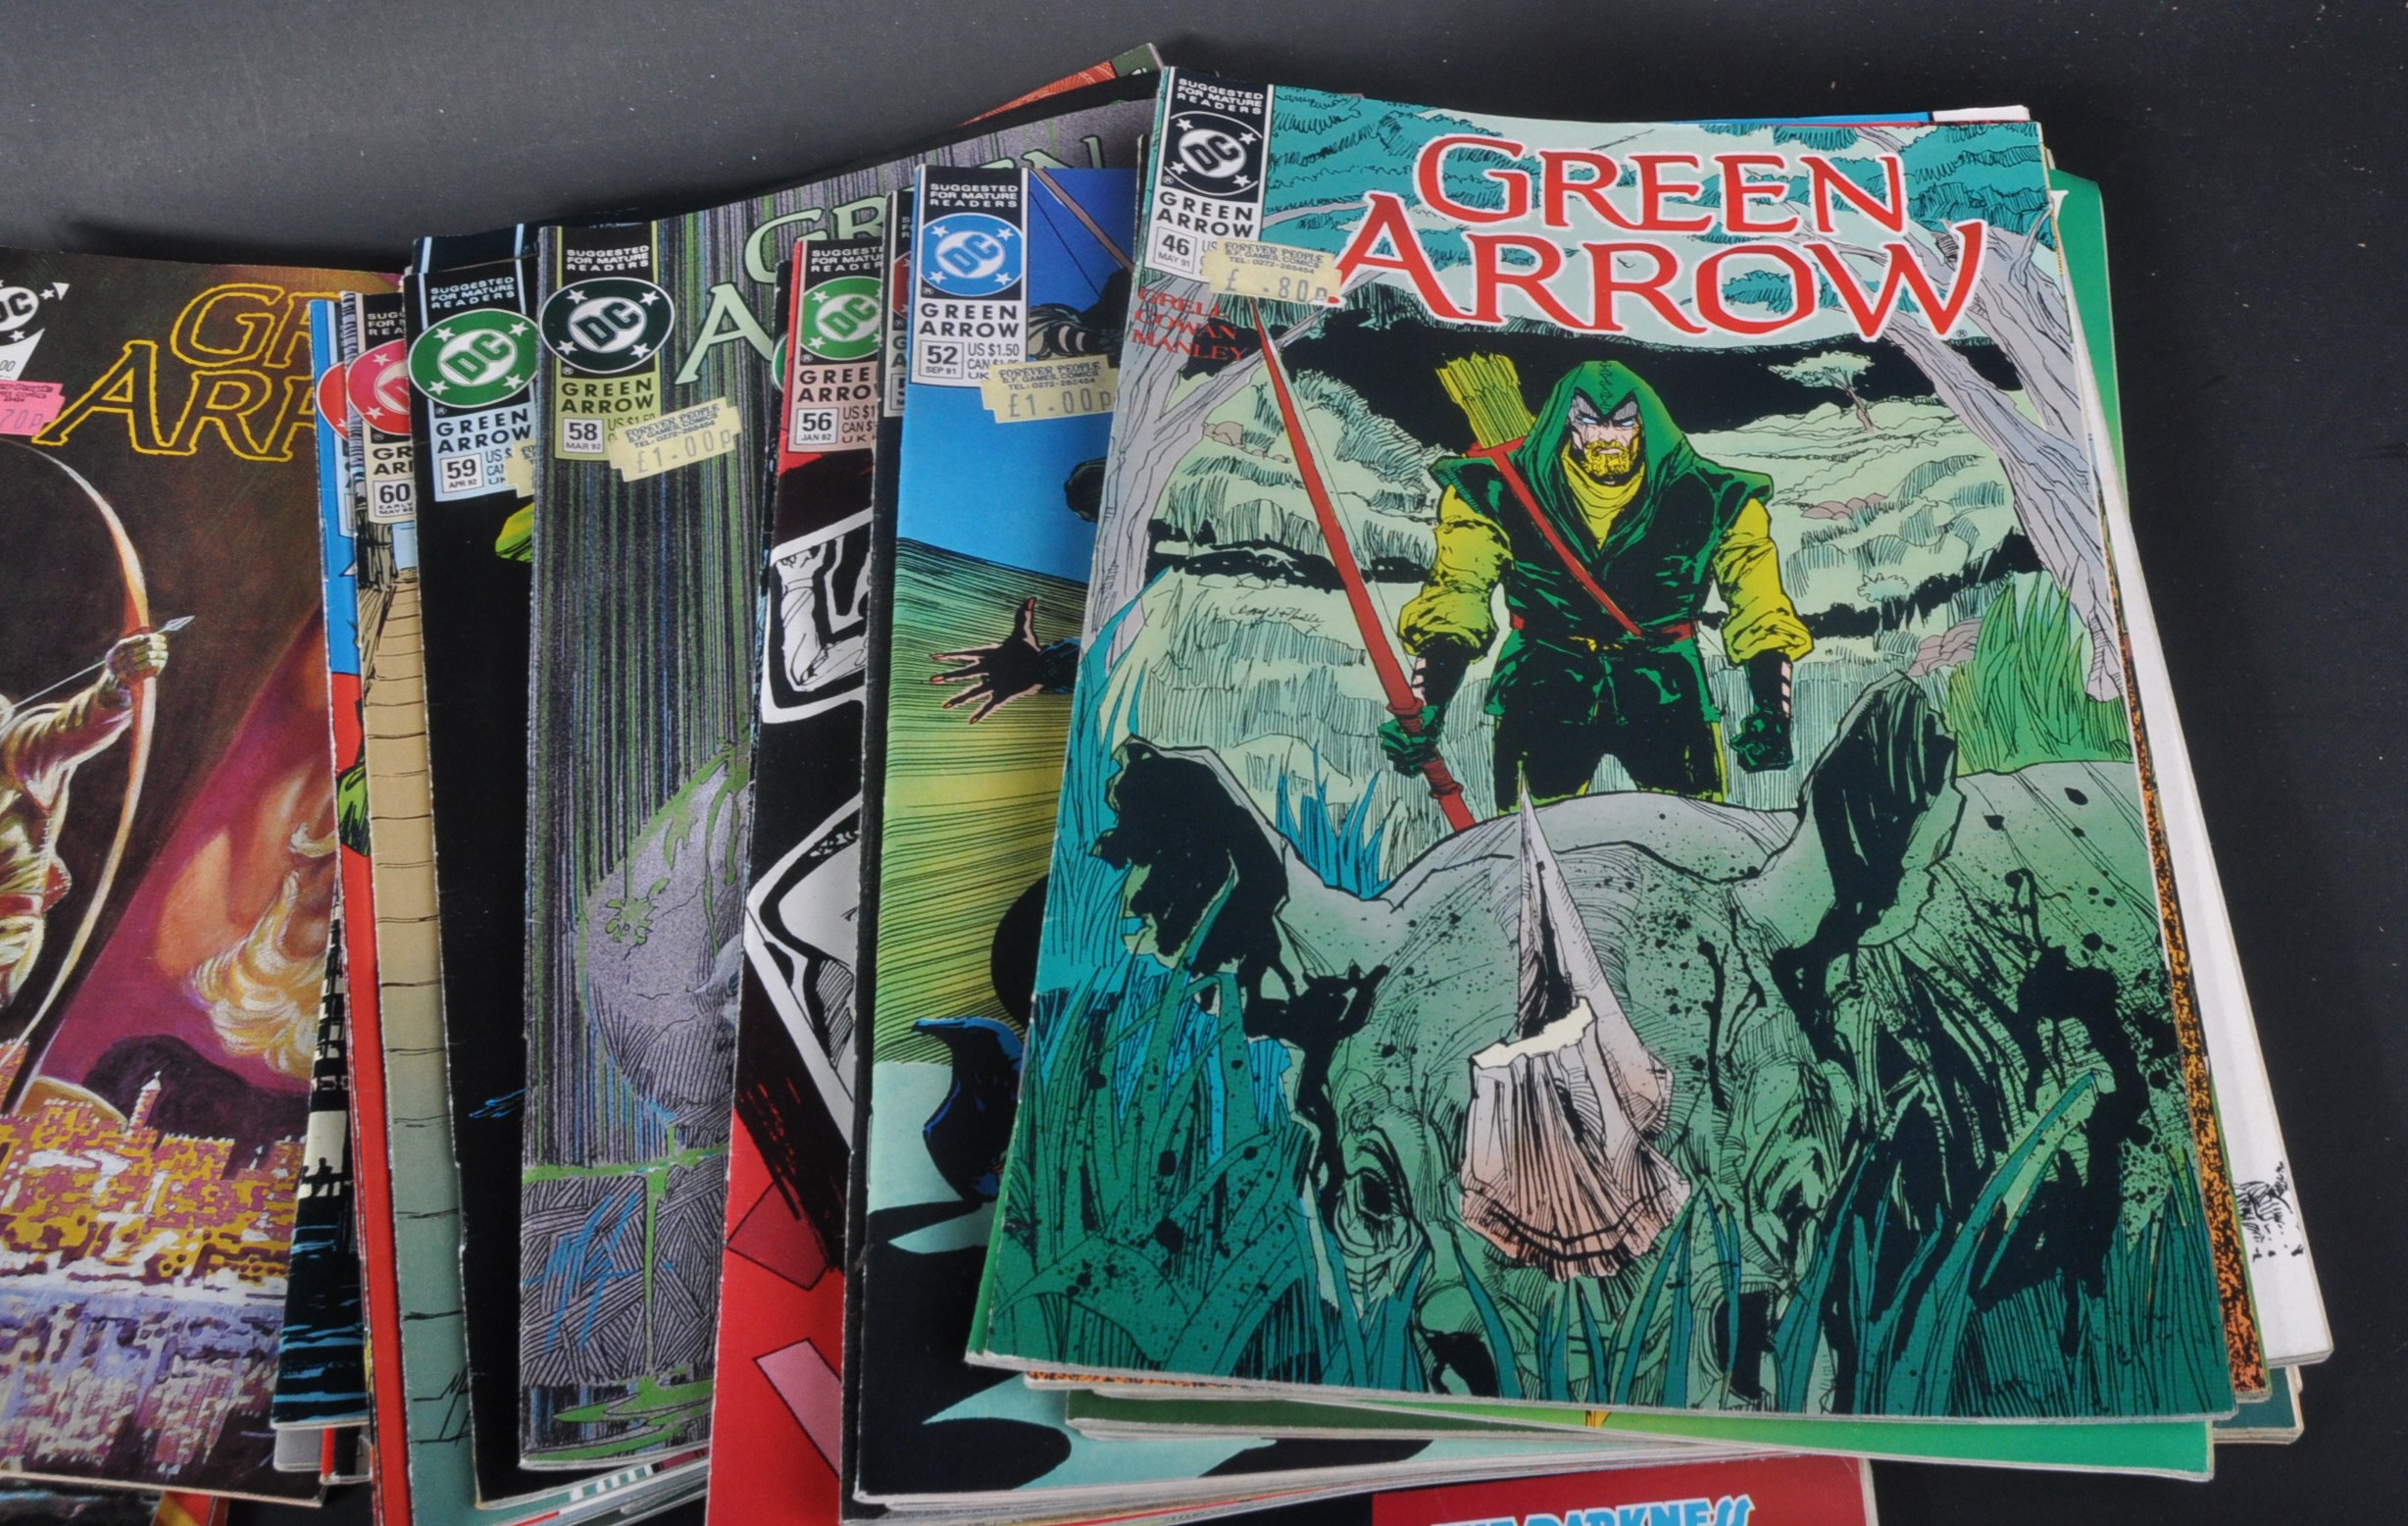 DC COMICS - GREEN ARROW - COLLECTION OF VINTAGE COMIC BOOKS - Image 5 of 6